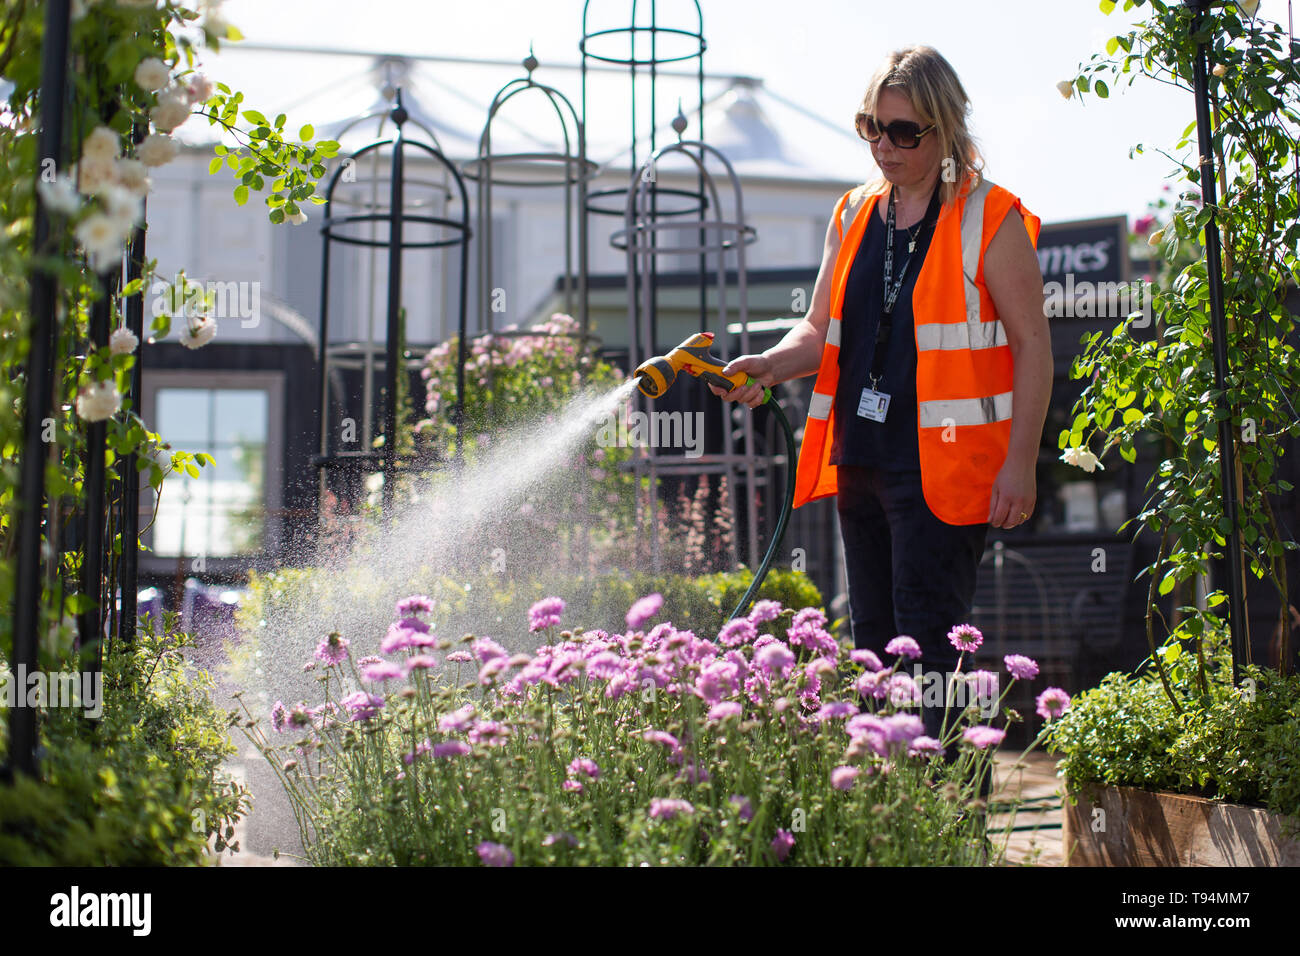 Flowers are watered during preparations for the RHS Chelsea Flower Show at the Royal Hospital Chelsea, London. Stock Photo